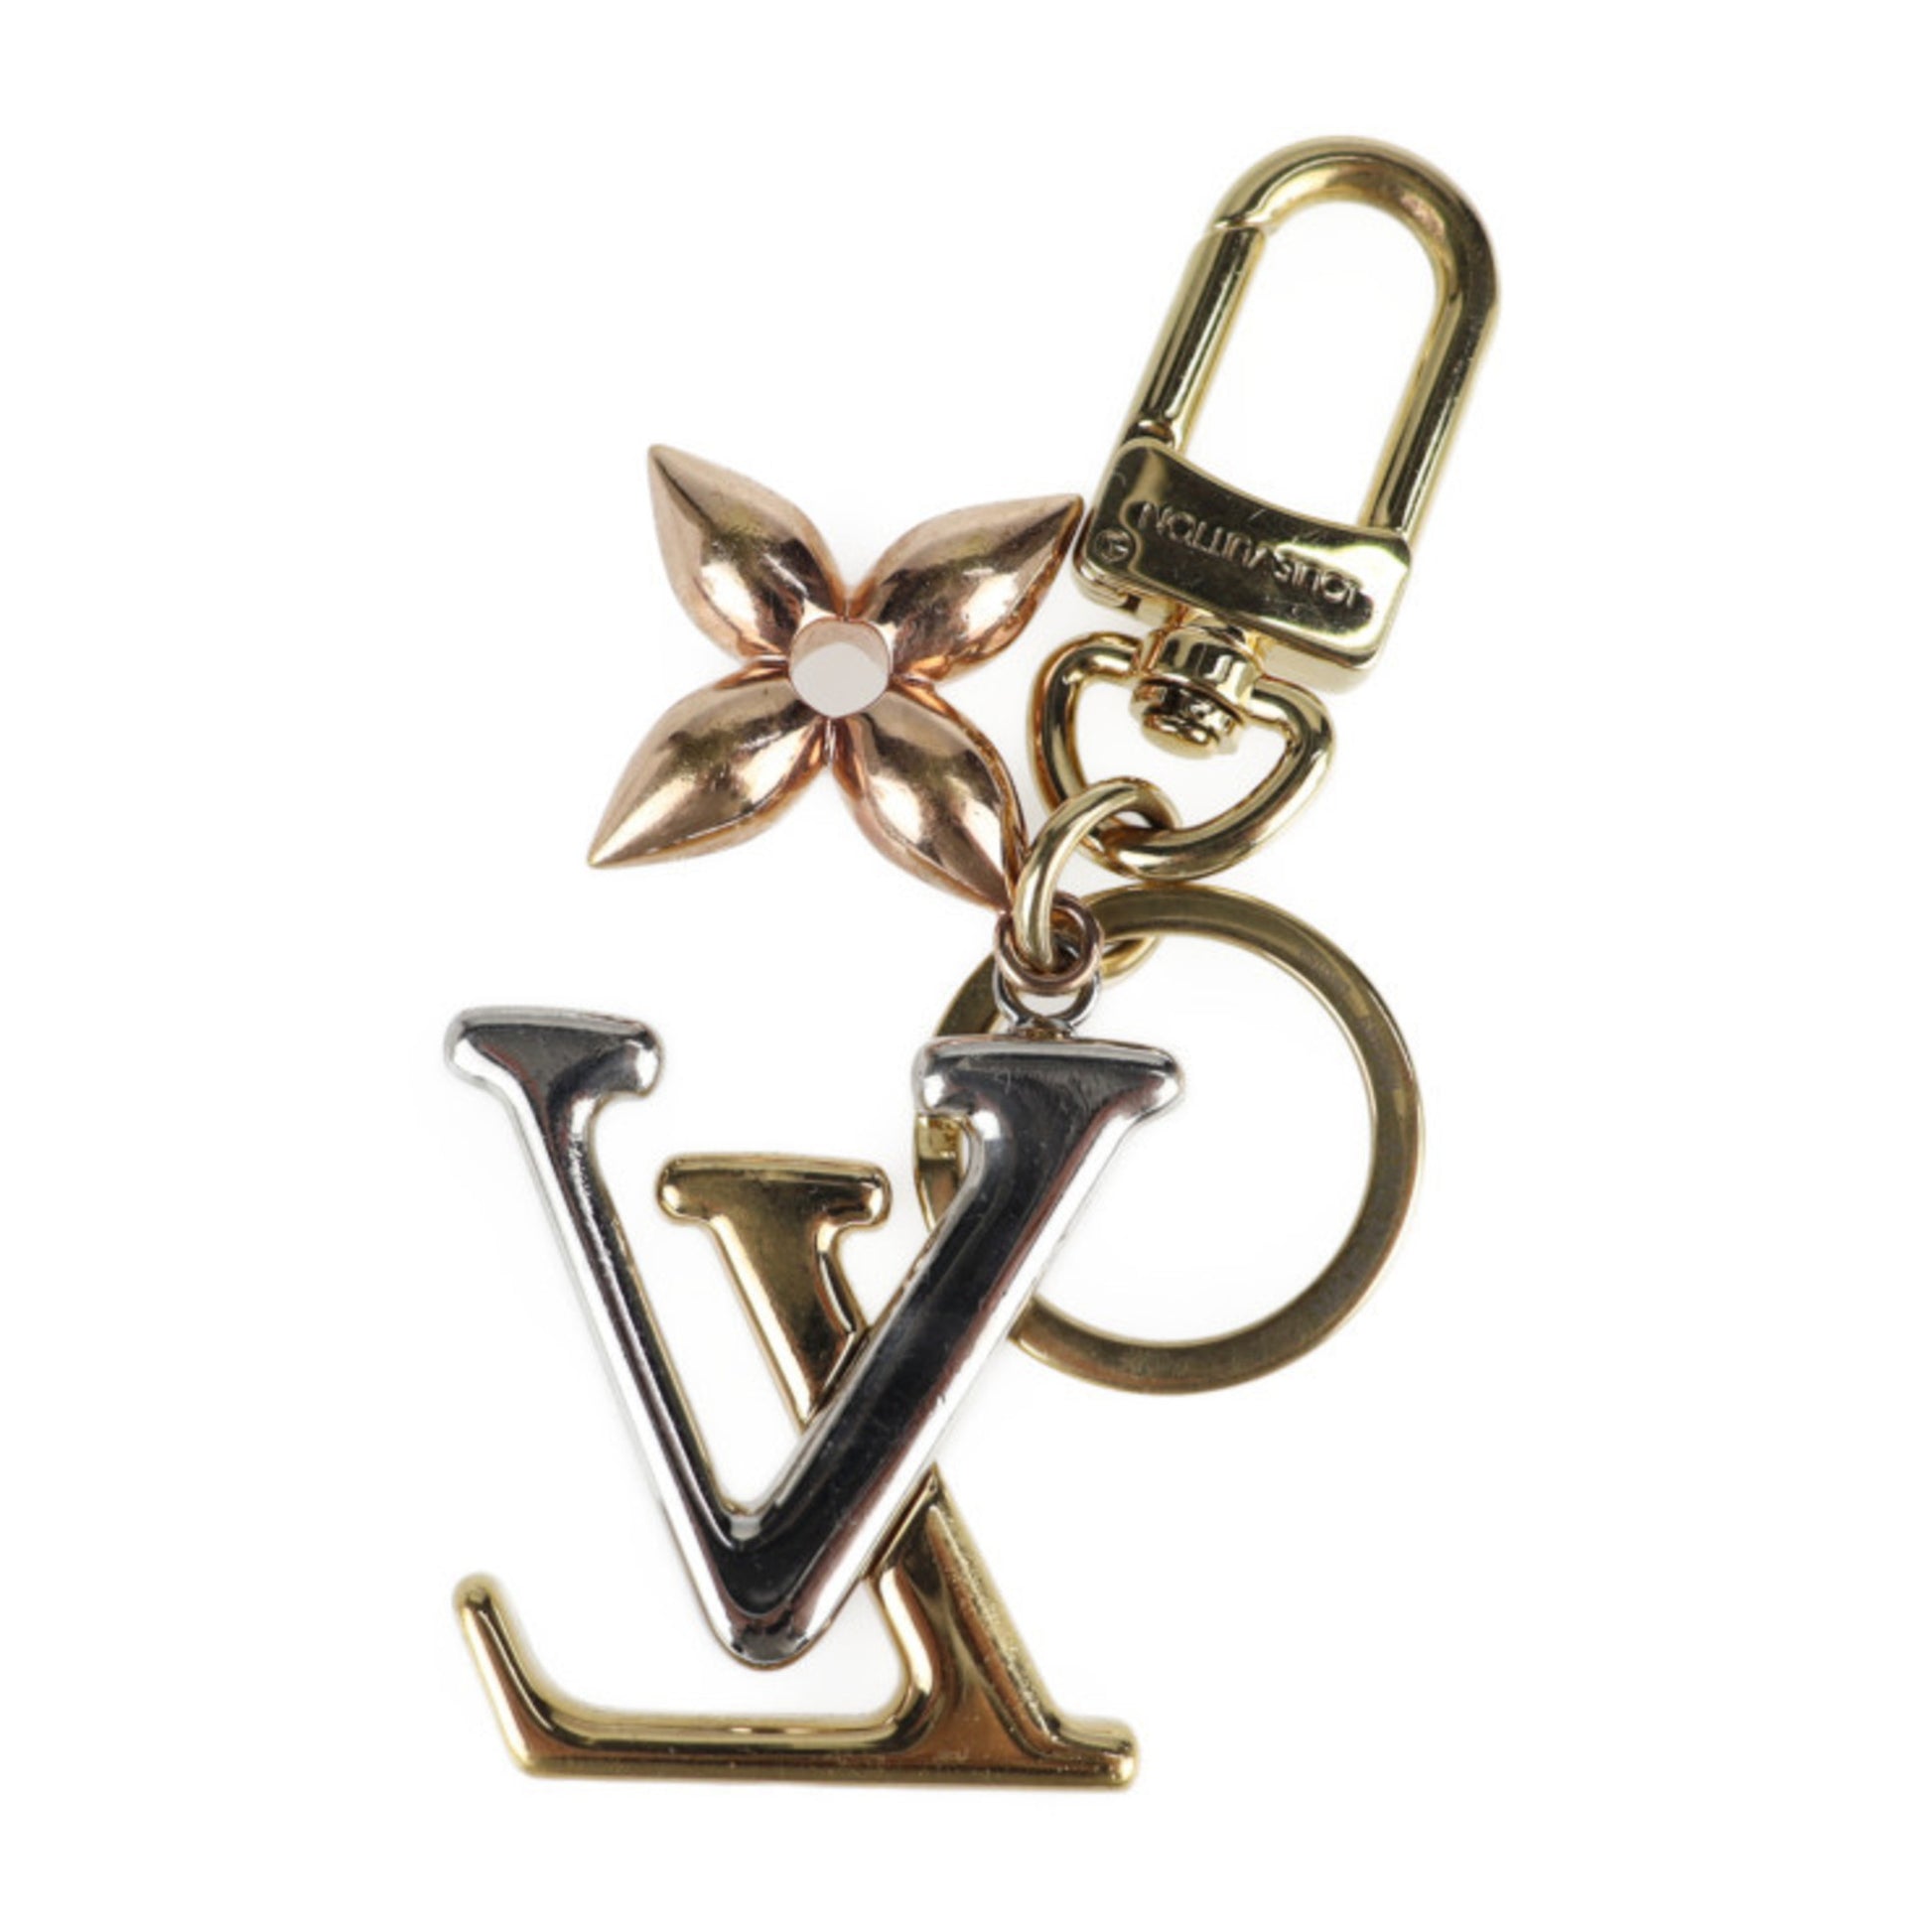 Louis Vuitton Lv new wave bag charm and key holder (M68449